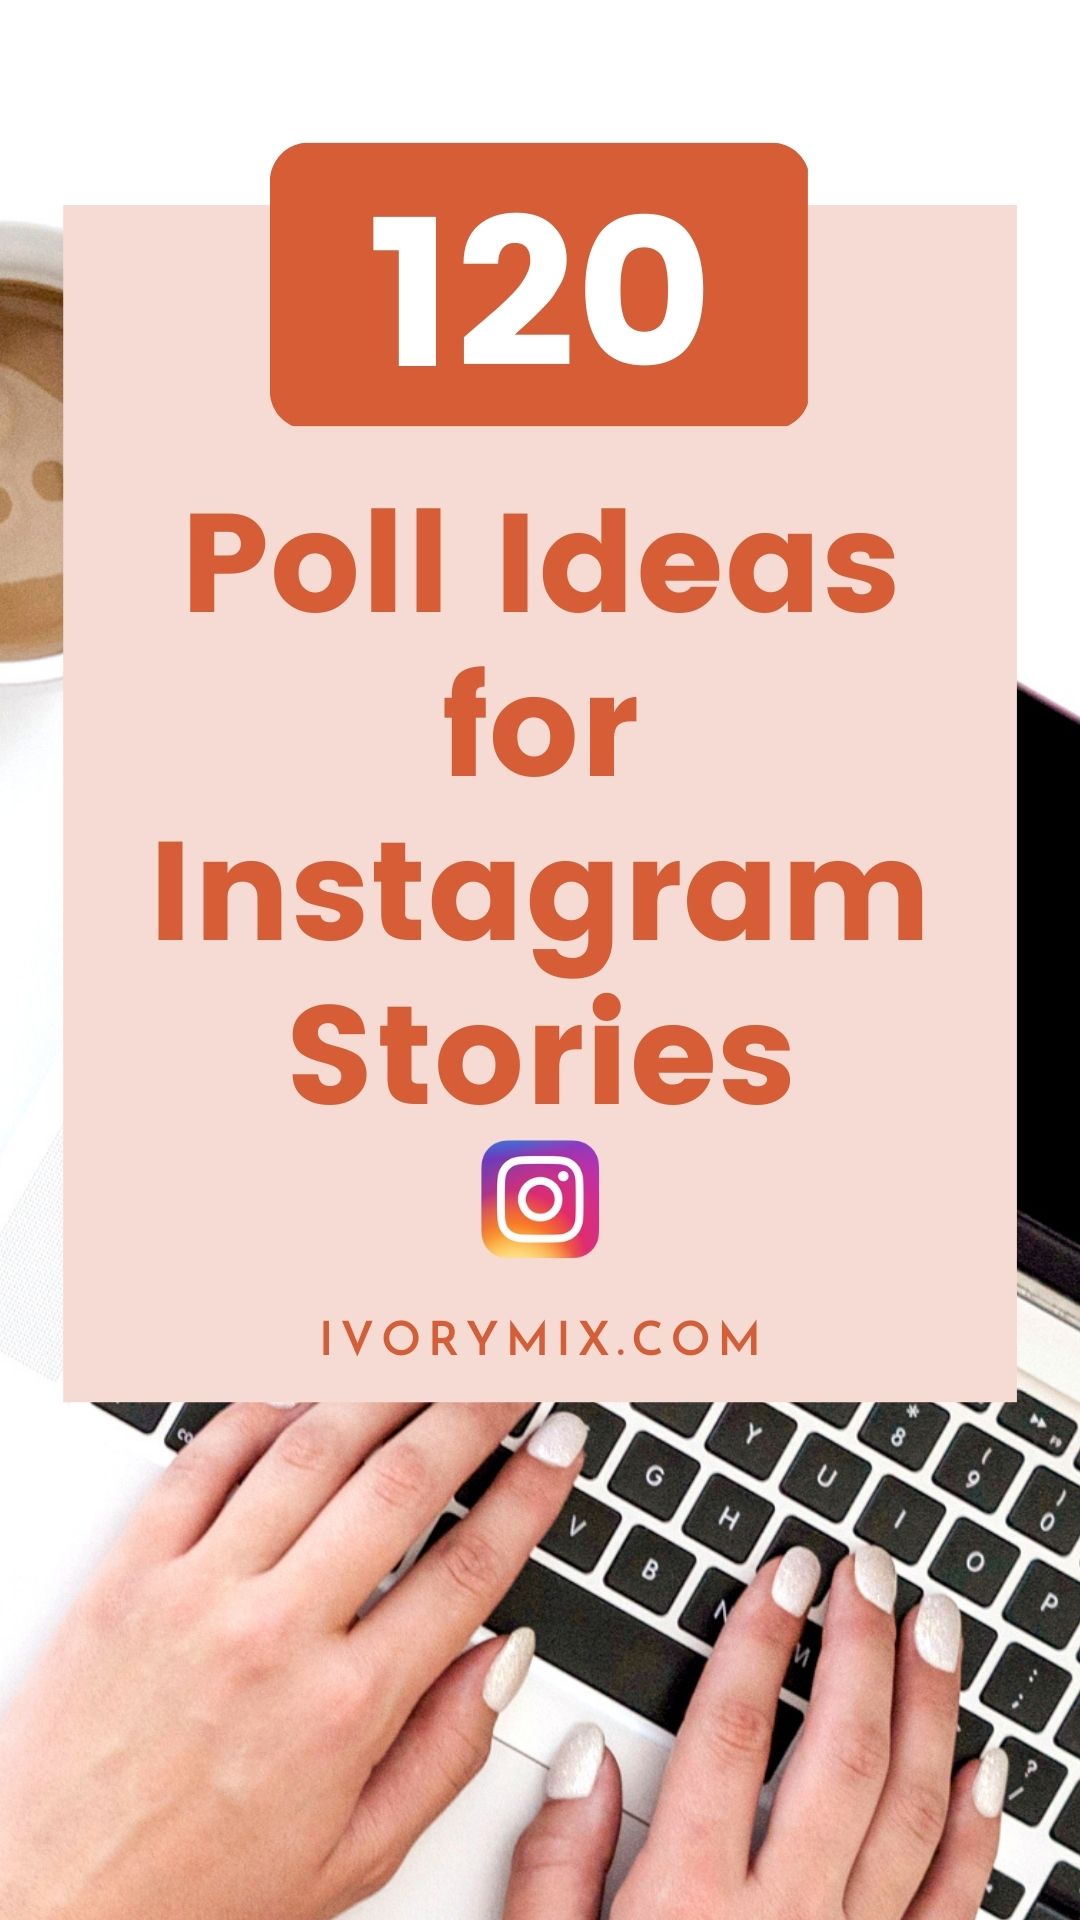 poll ideas and templates for your instagram stories